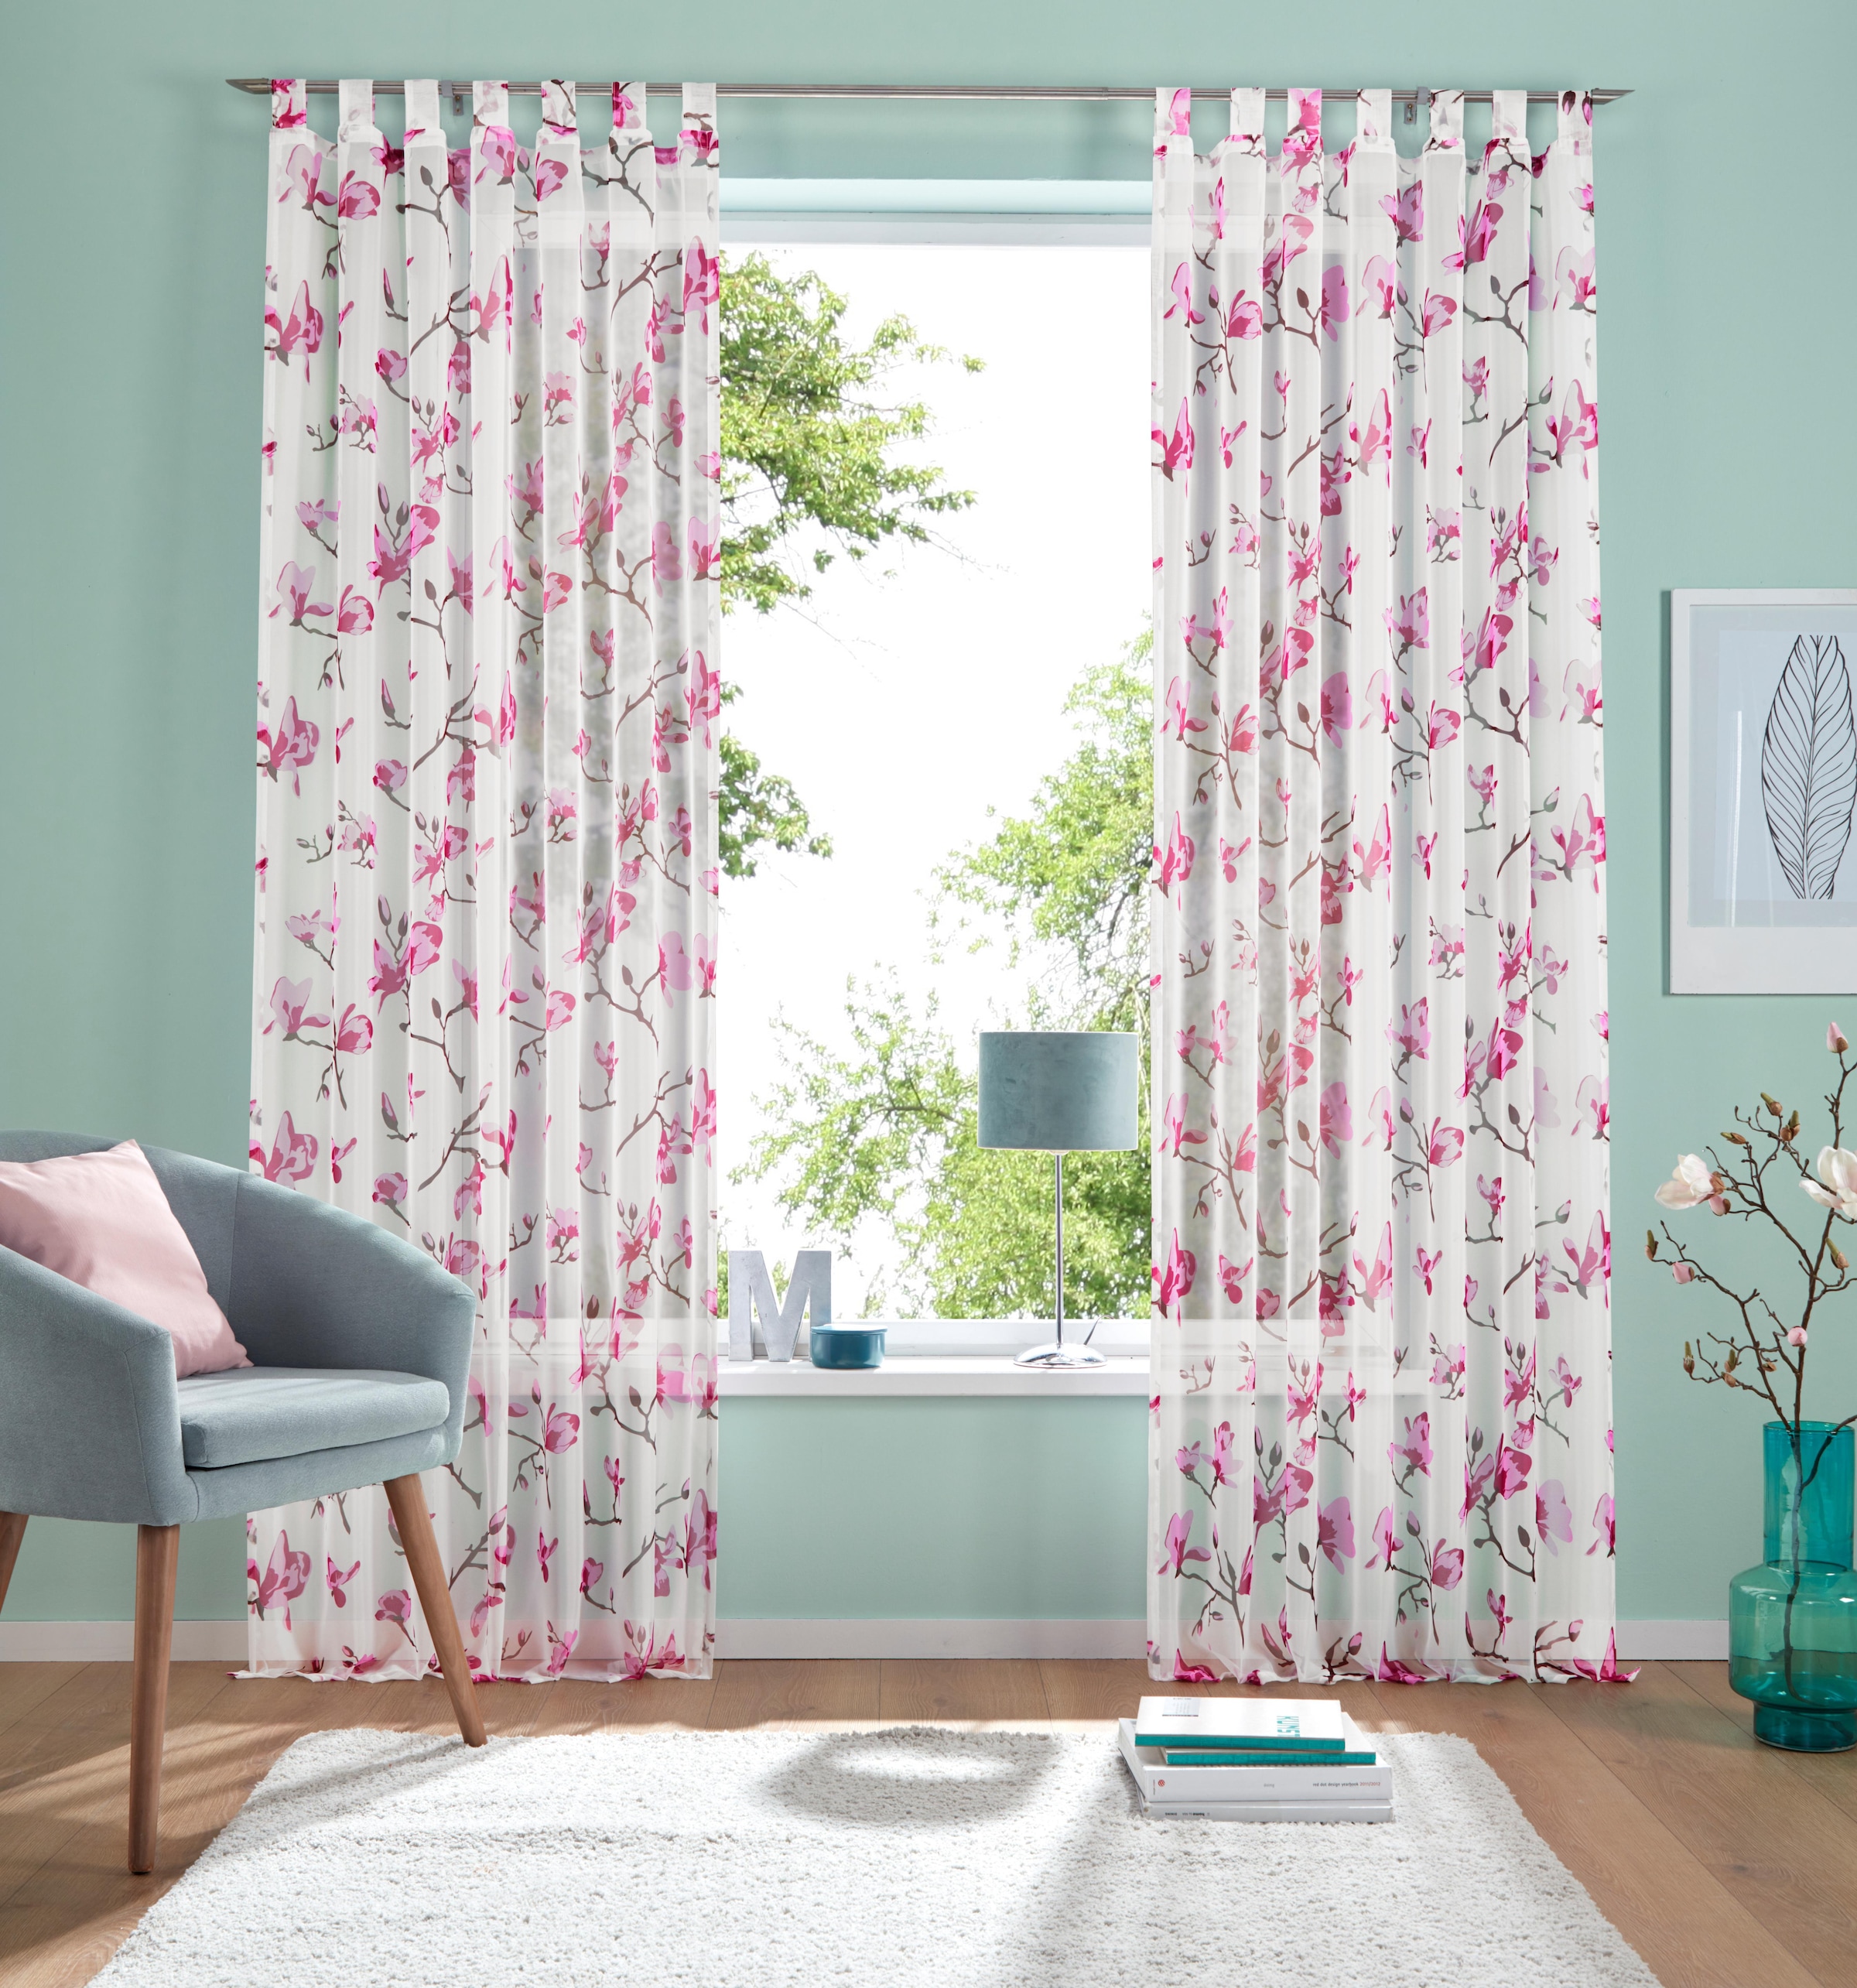 my Transparent, Polyester »Orchidee«, Gardine St.), home (1 Voile,